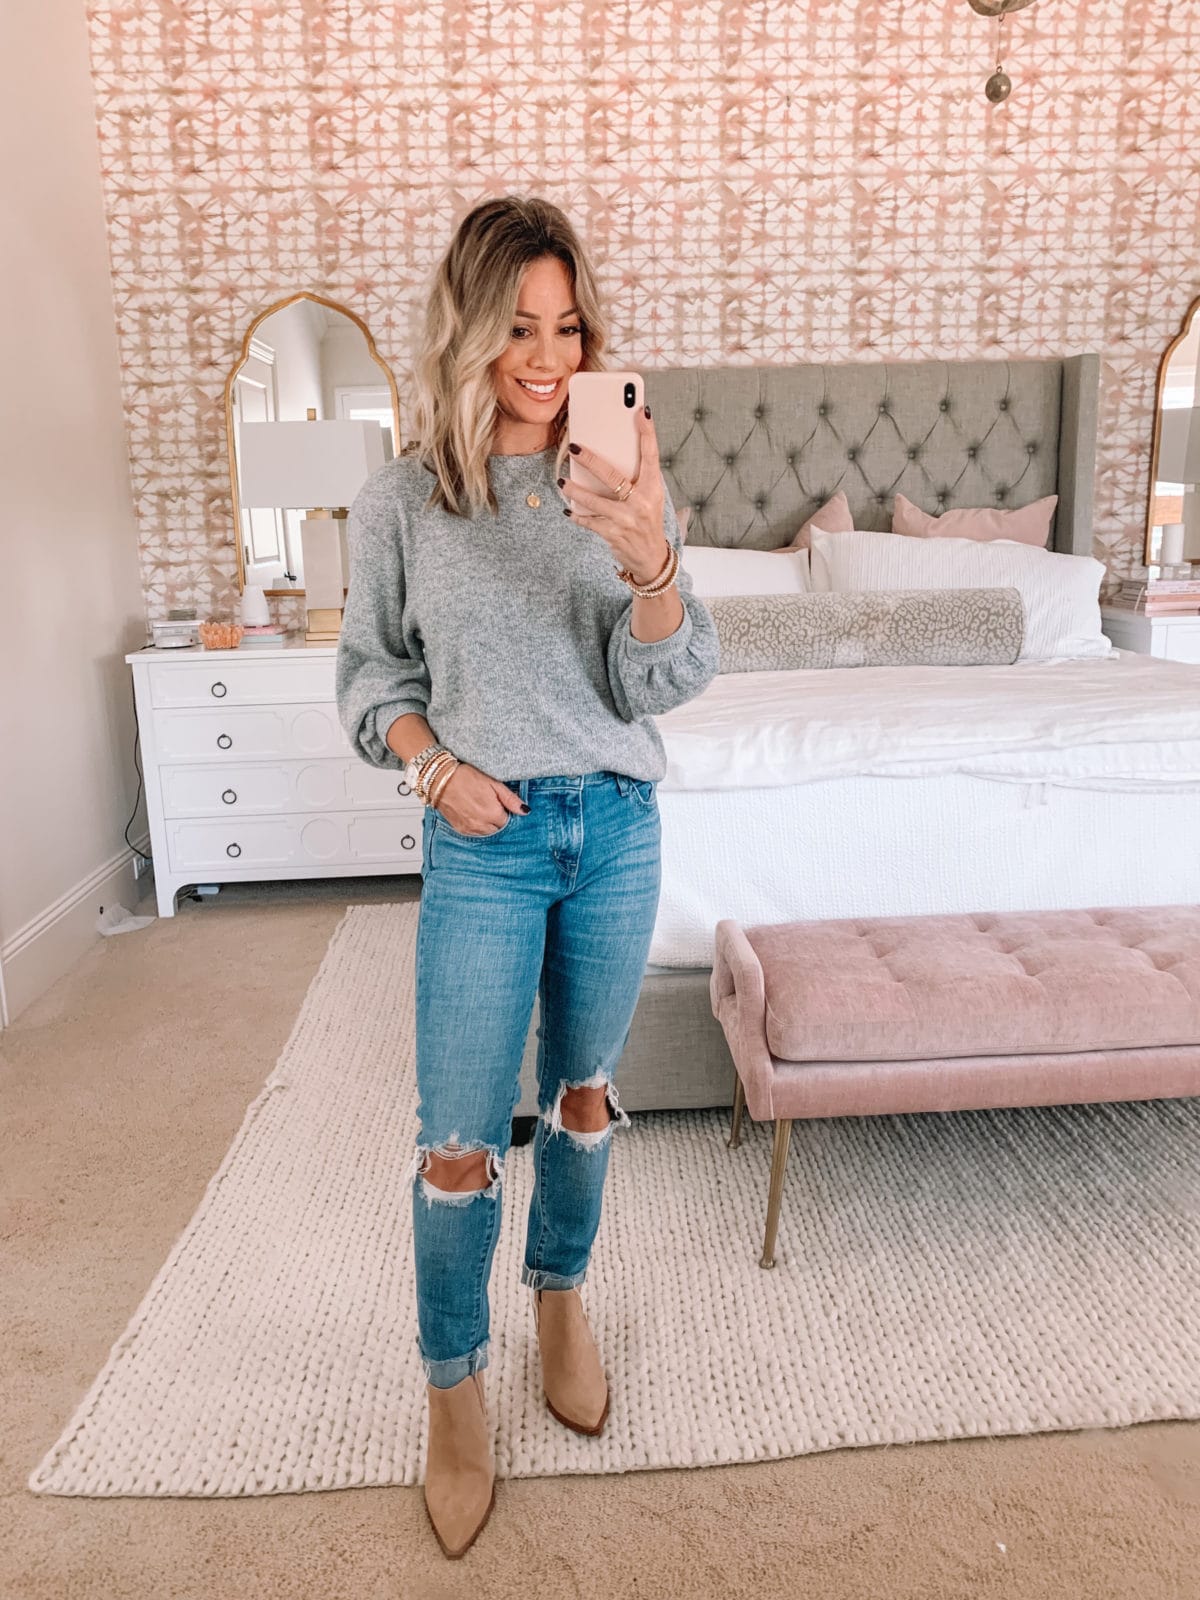 Amazon Fashion Faves, Puff Sleeve Sweater, Levis Jeans, Booties